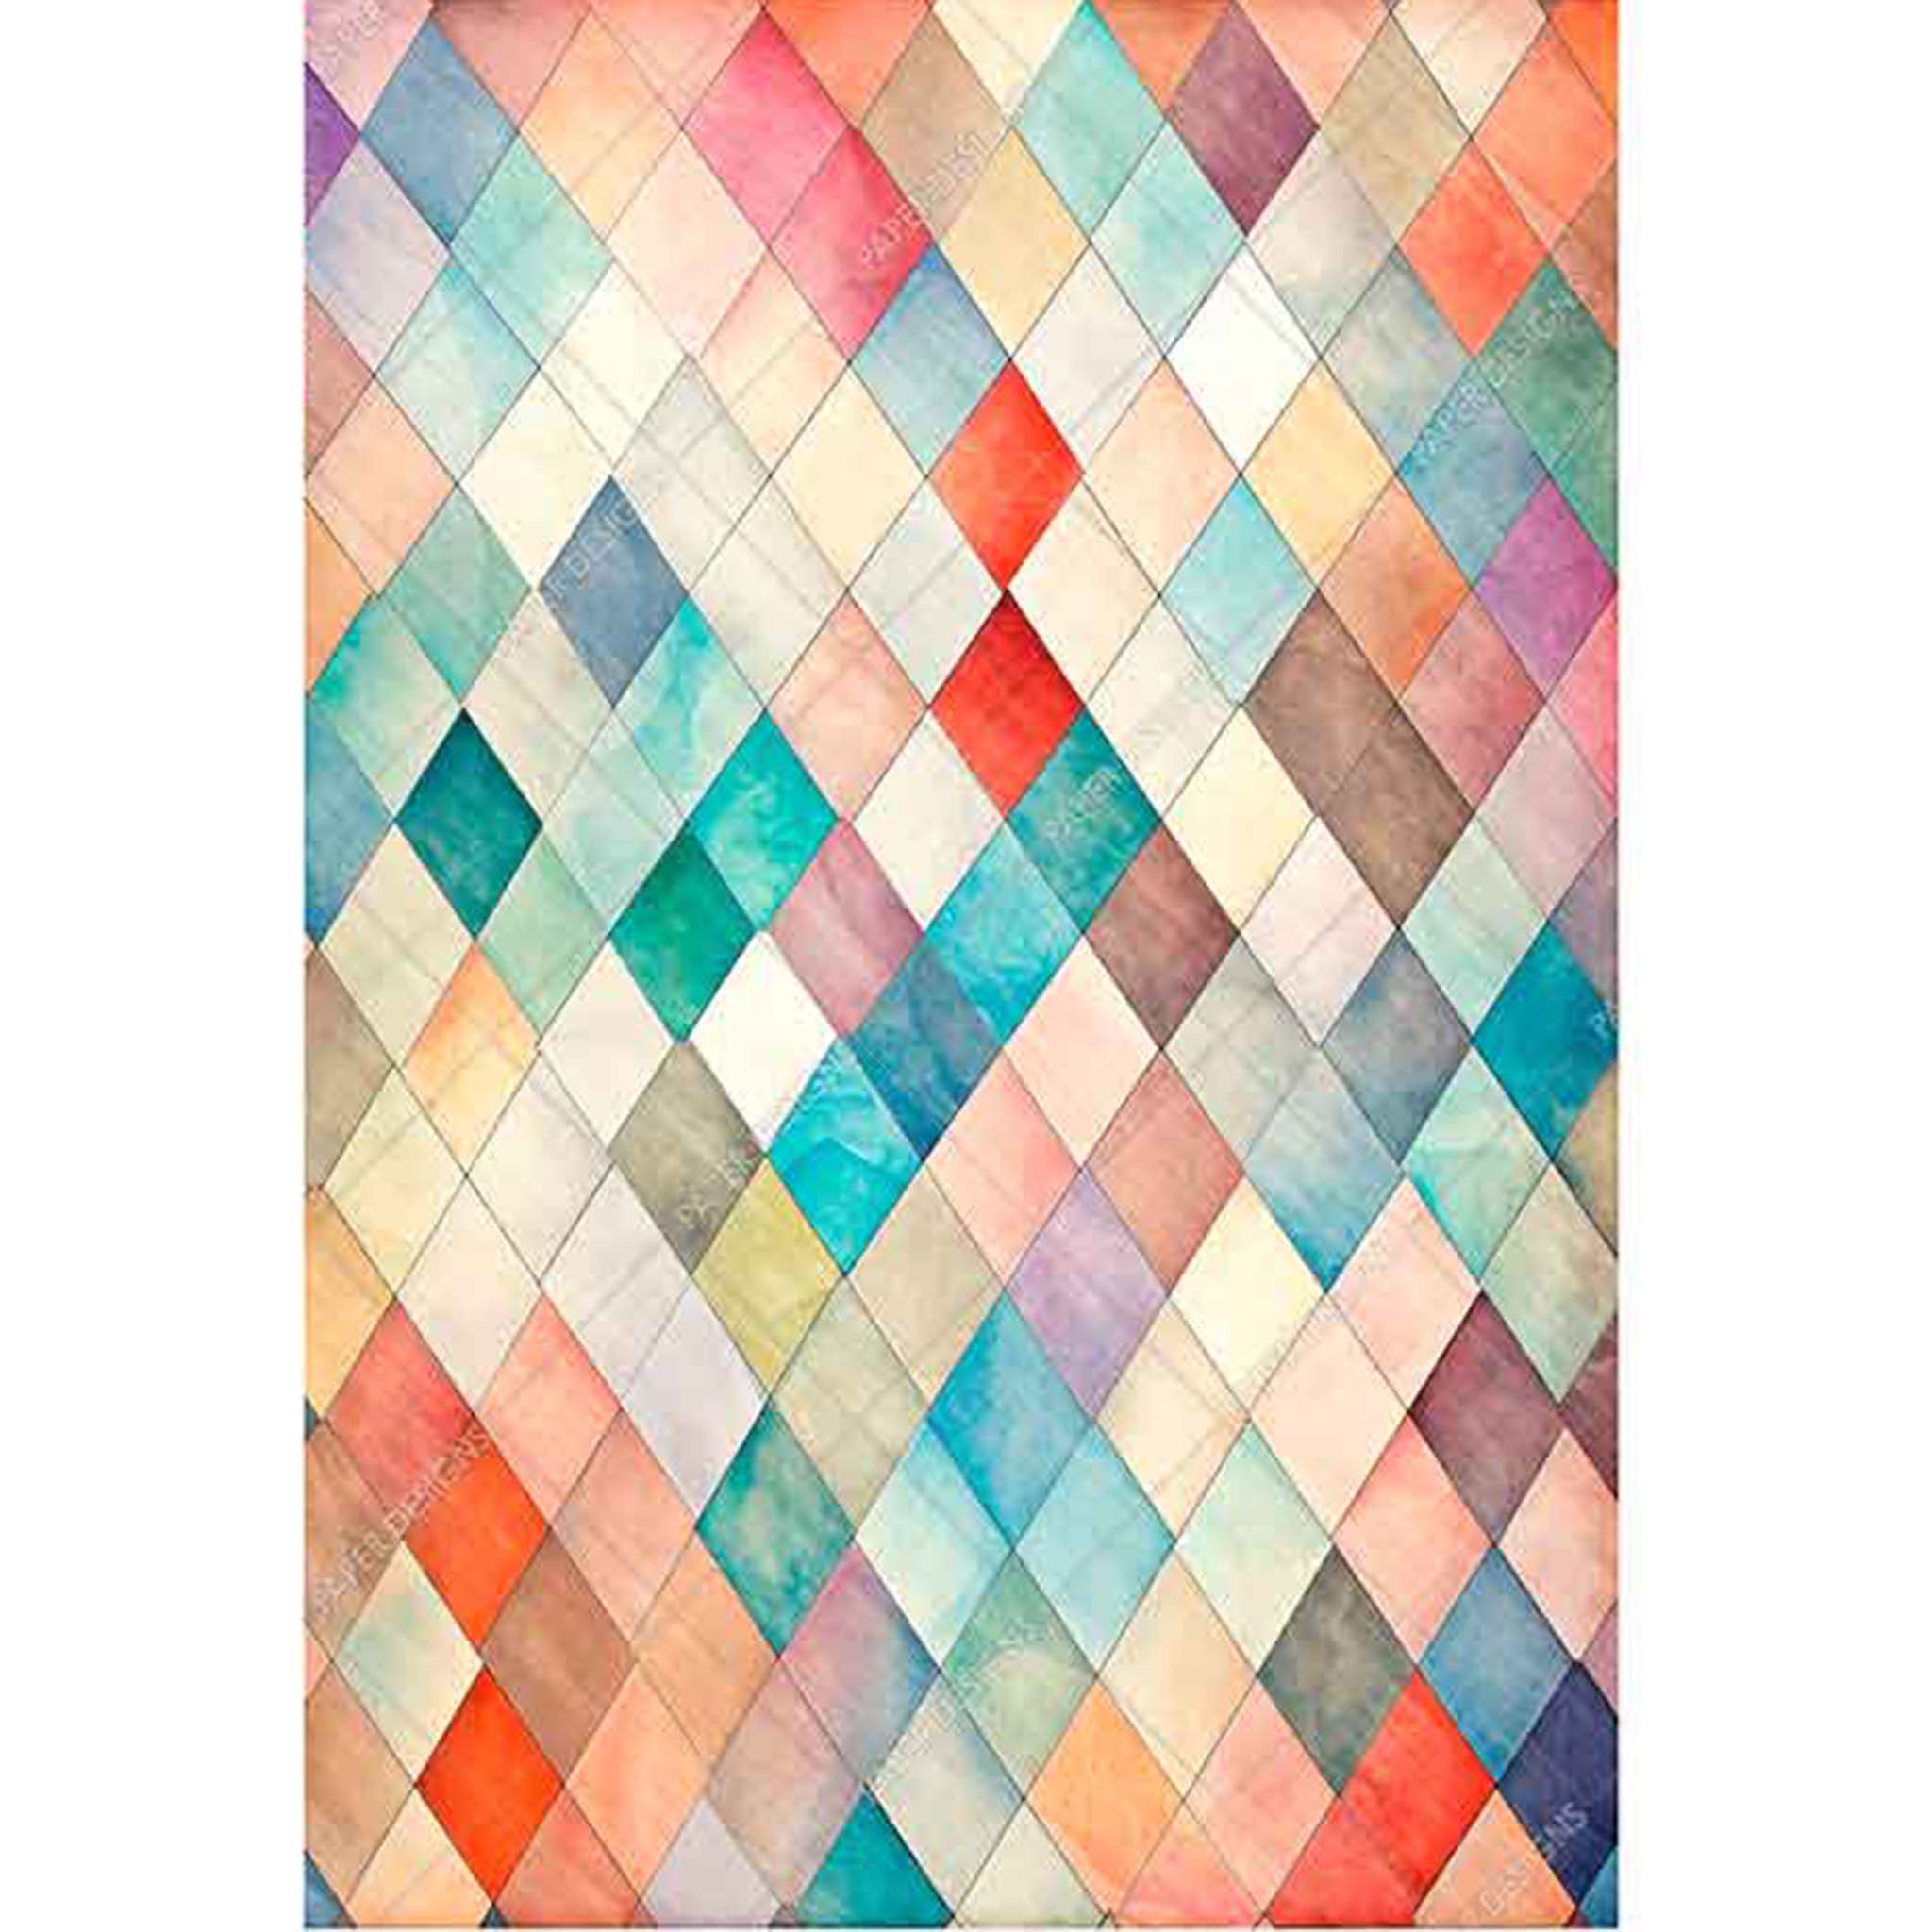 A1 rice paper design that features a playful diamond print in shades of teal, orange, and cream. White borders are on the sides.